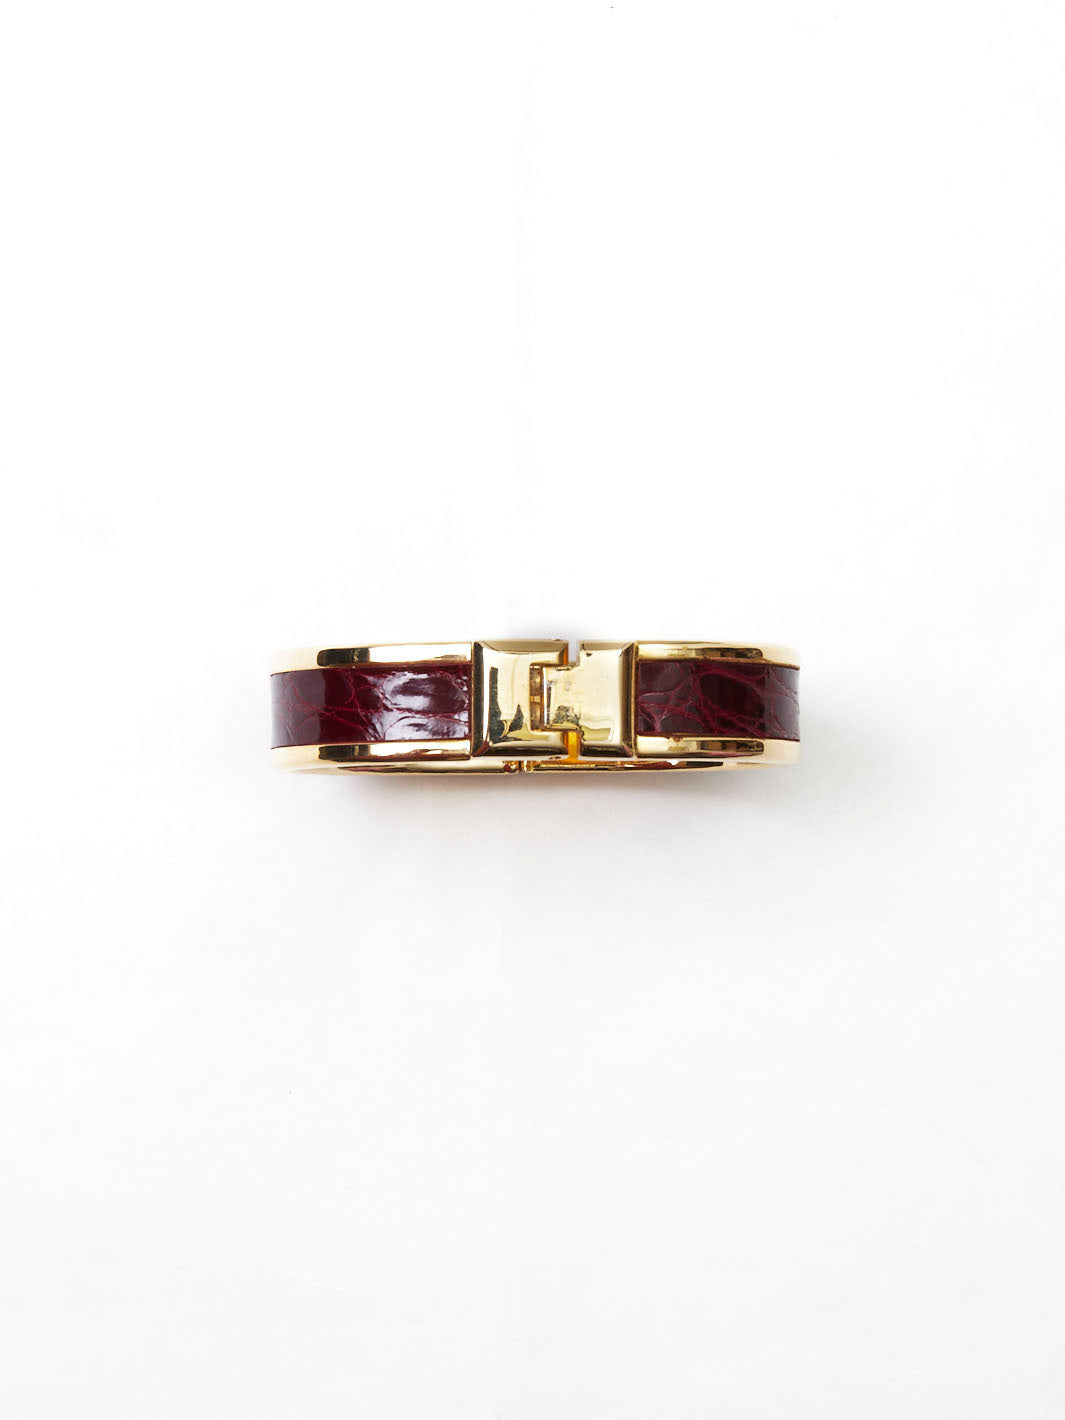 1980s Correani rigid bracelet with crocodile patterned  strap and